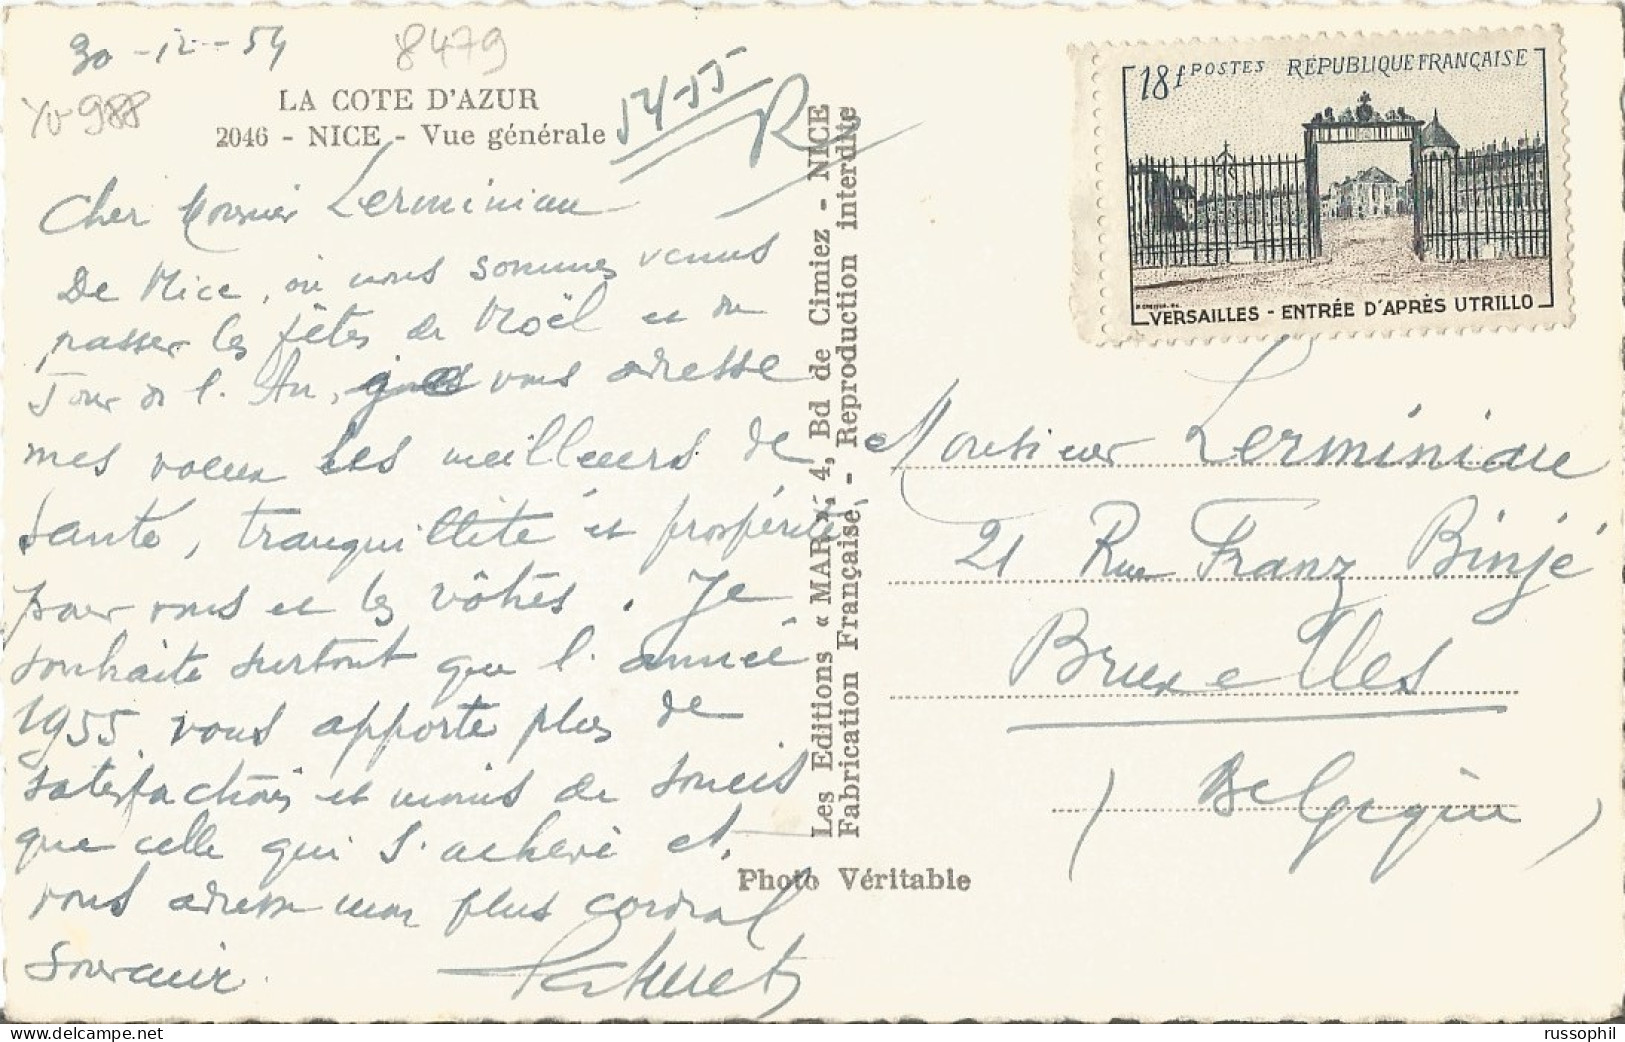 FRANCE -  VARIETY & CURIOSITY - Yv #988 ALONE FRANKING PC TO BELGIUM - PC CIRCULATED BUT STAMP NOT CANCELLED - 1926 - Covers & Documents